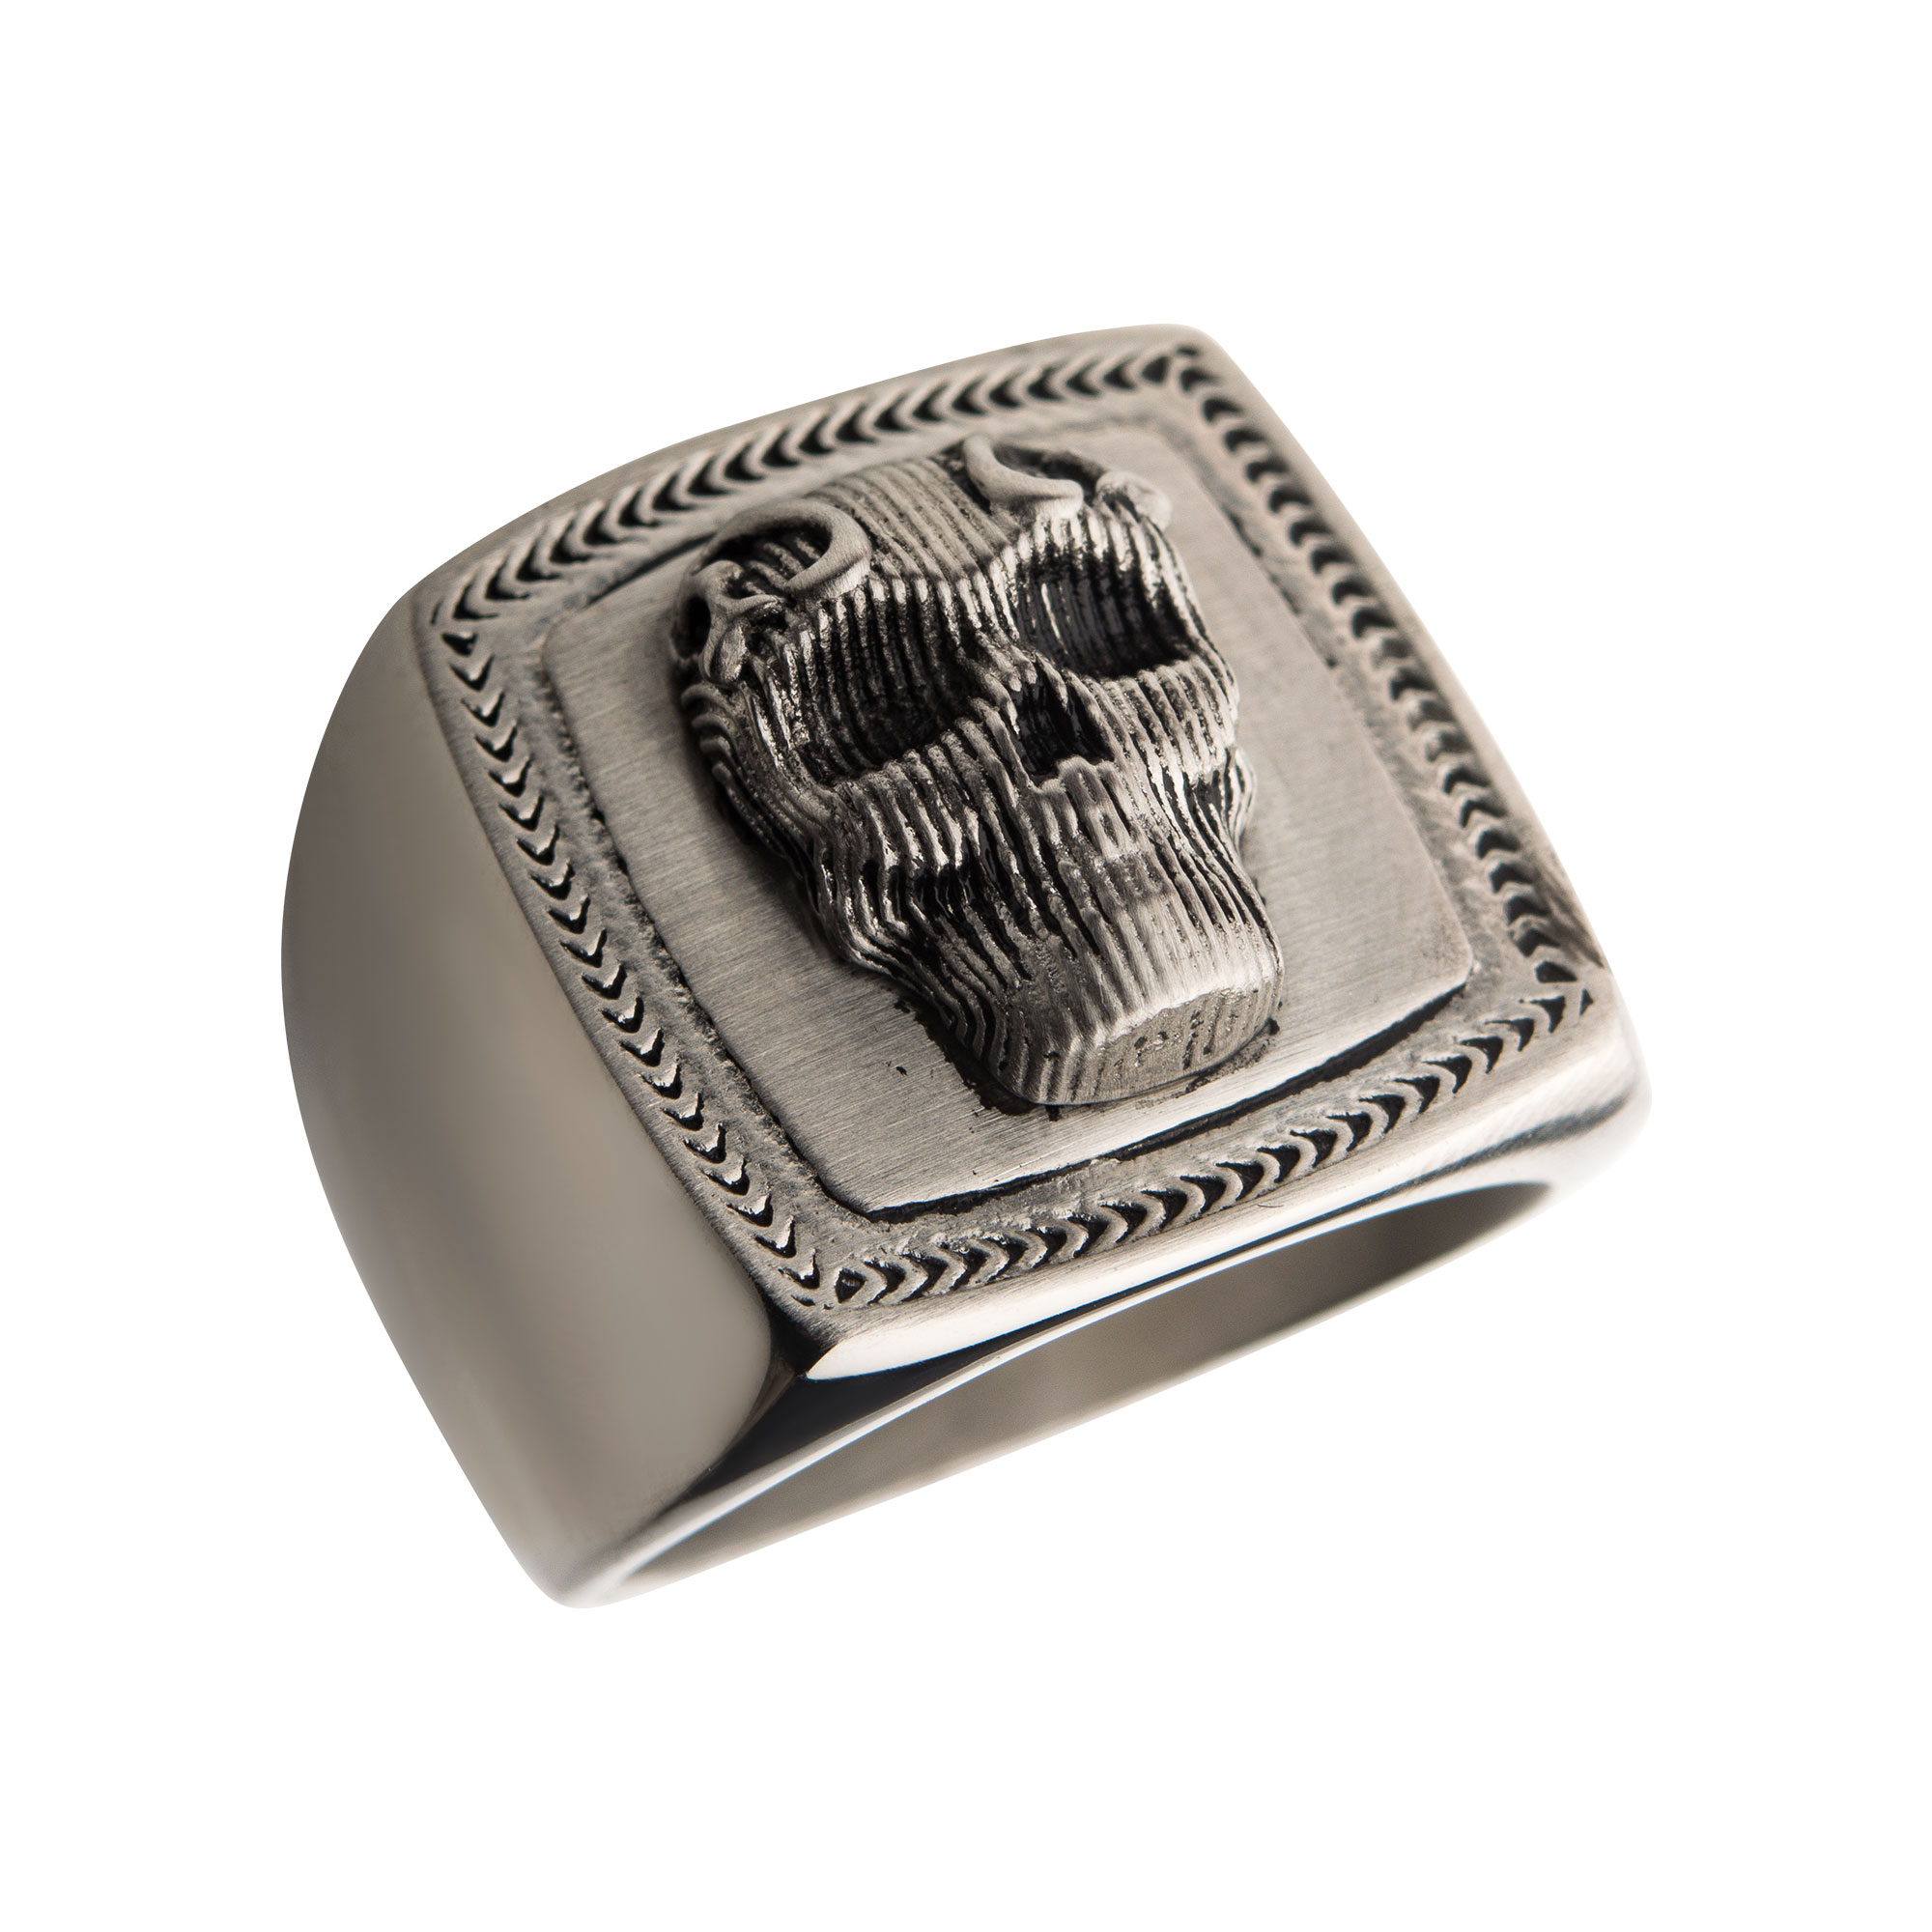 Black Oxidized Matte Finish Steel 3D Skull Ring Thurber's Fine Jewelry Wadsworth, OH